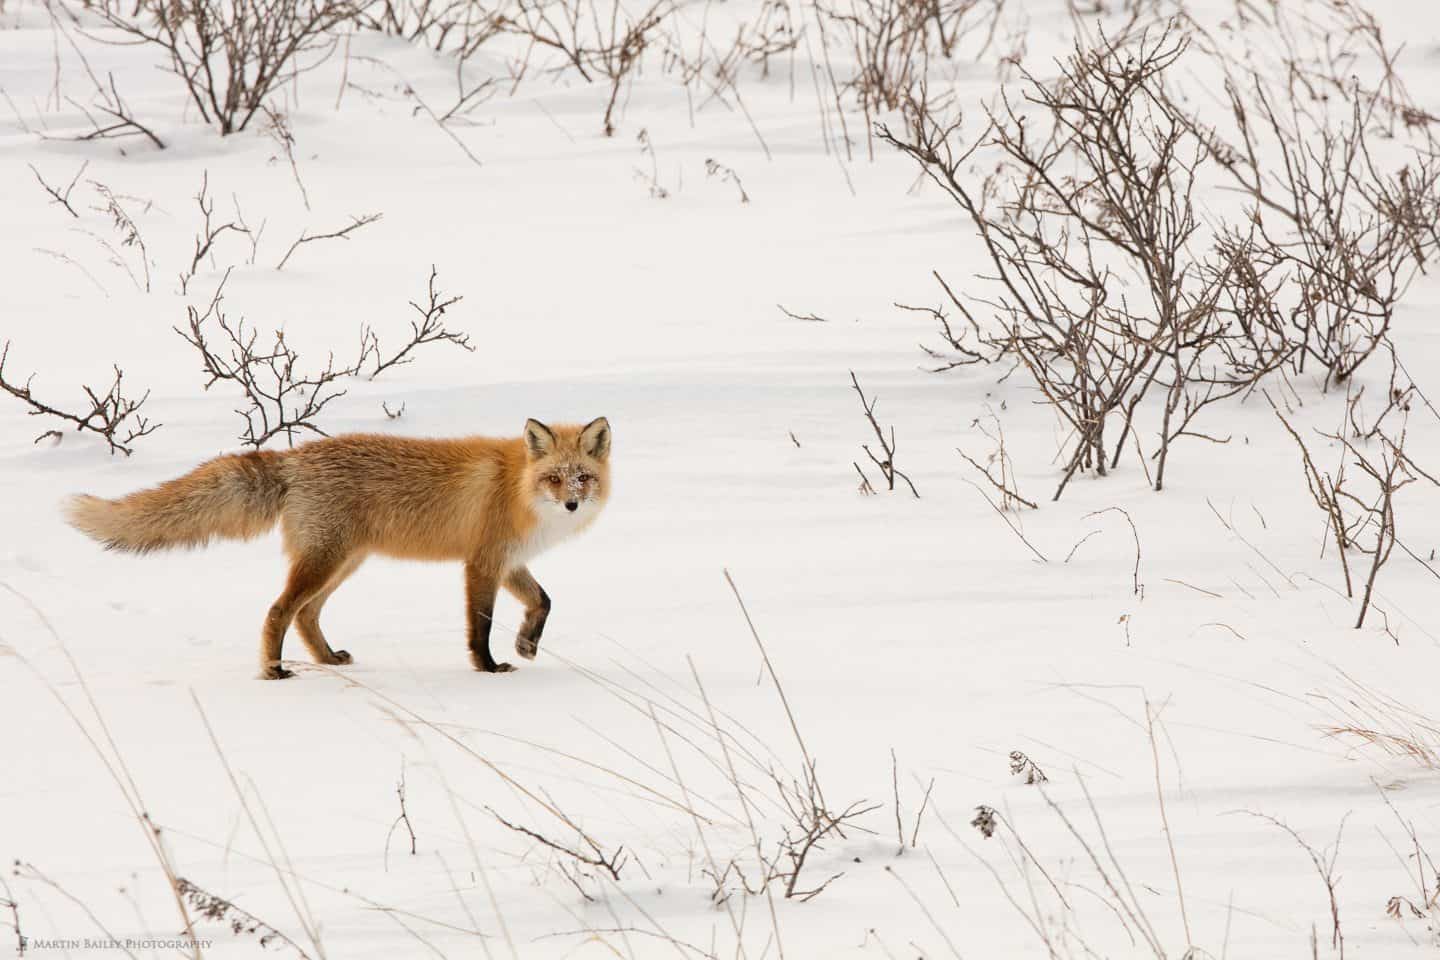 Snowy Faced Northern Red Fox